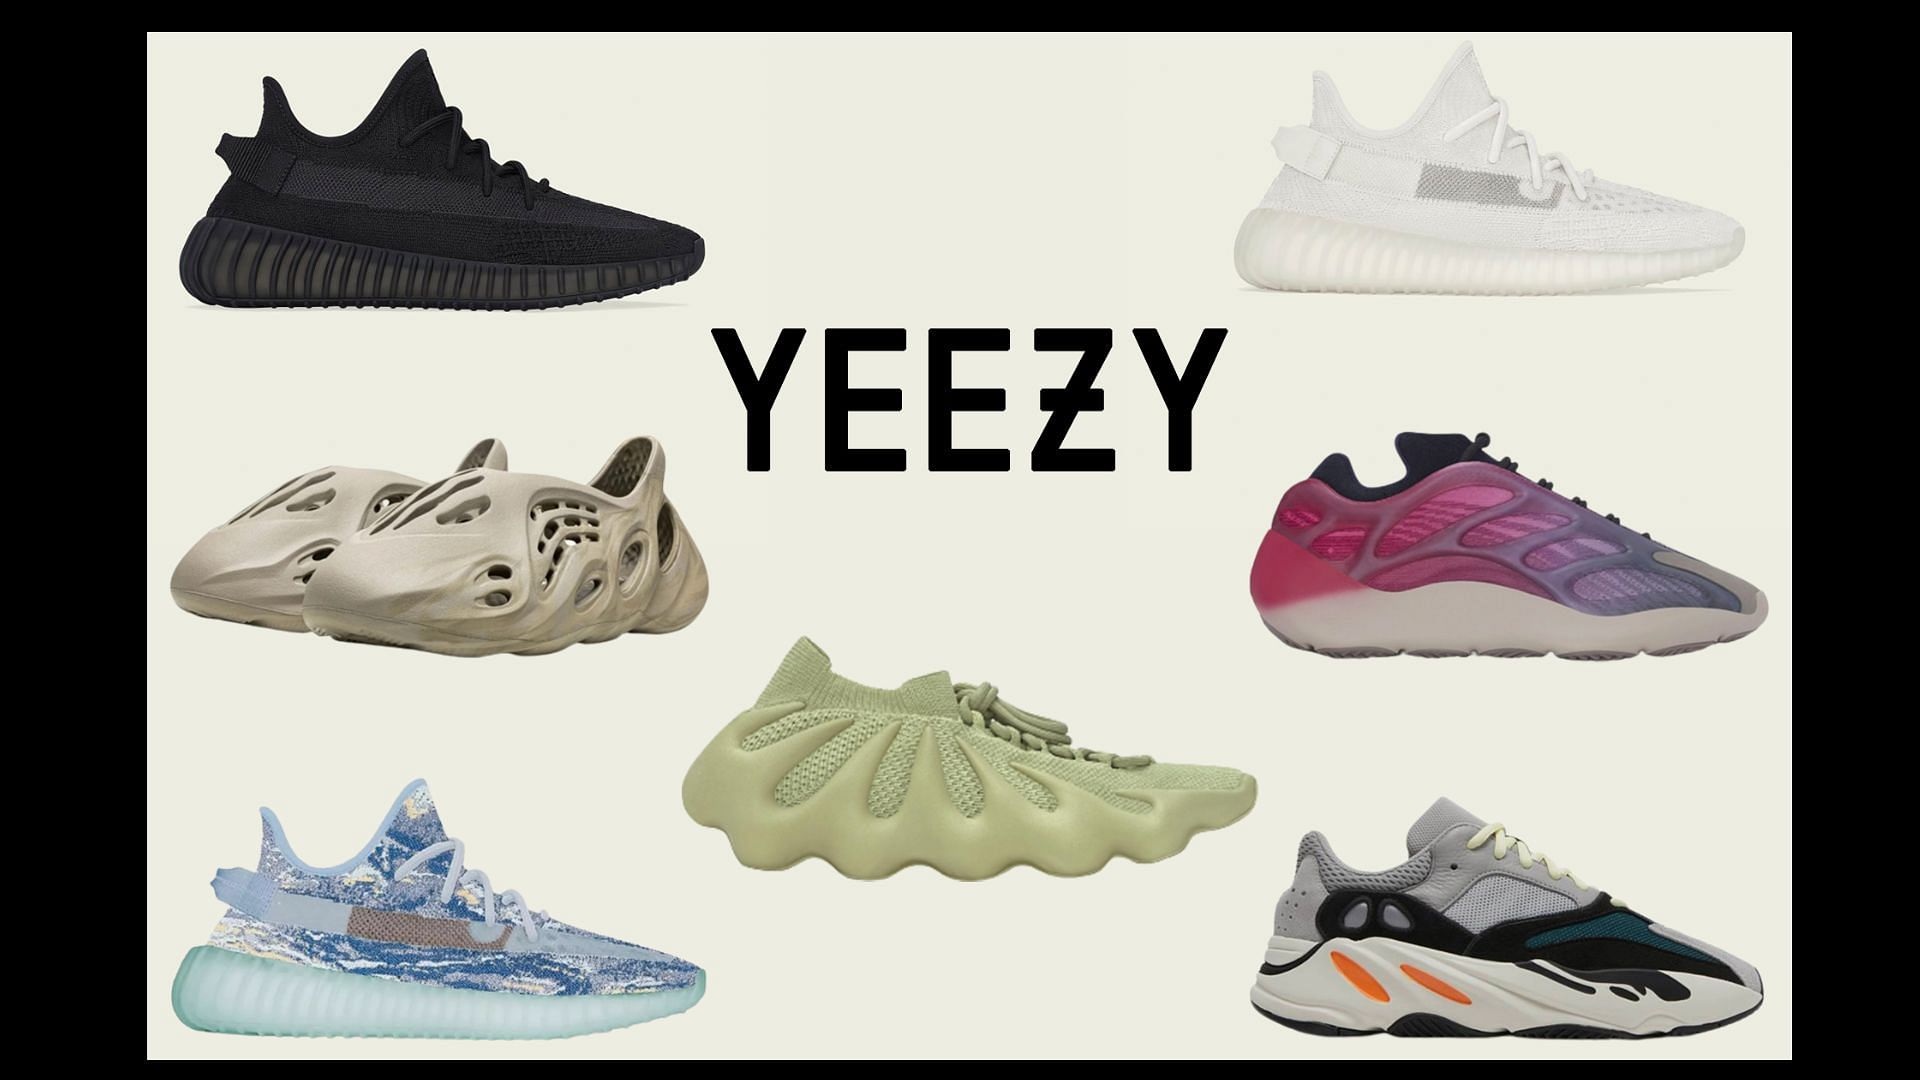 Yeezy Day 2022 Significance, dates, and more details explored